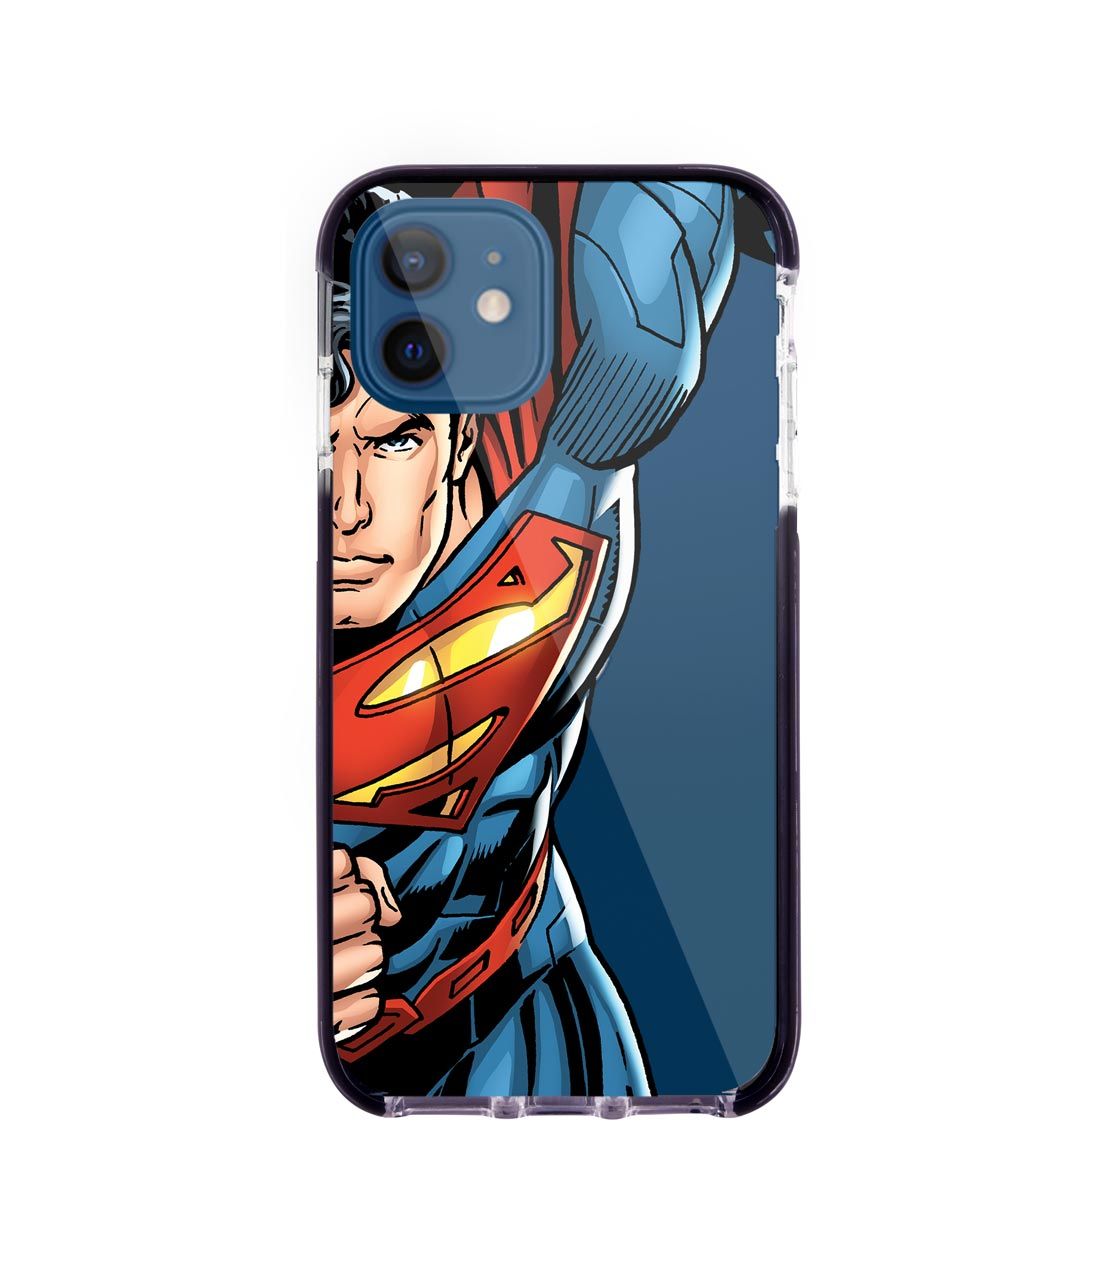 Speed it like Superman - Extreme Case for iPhone 12